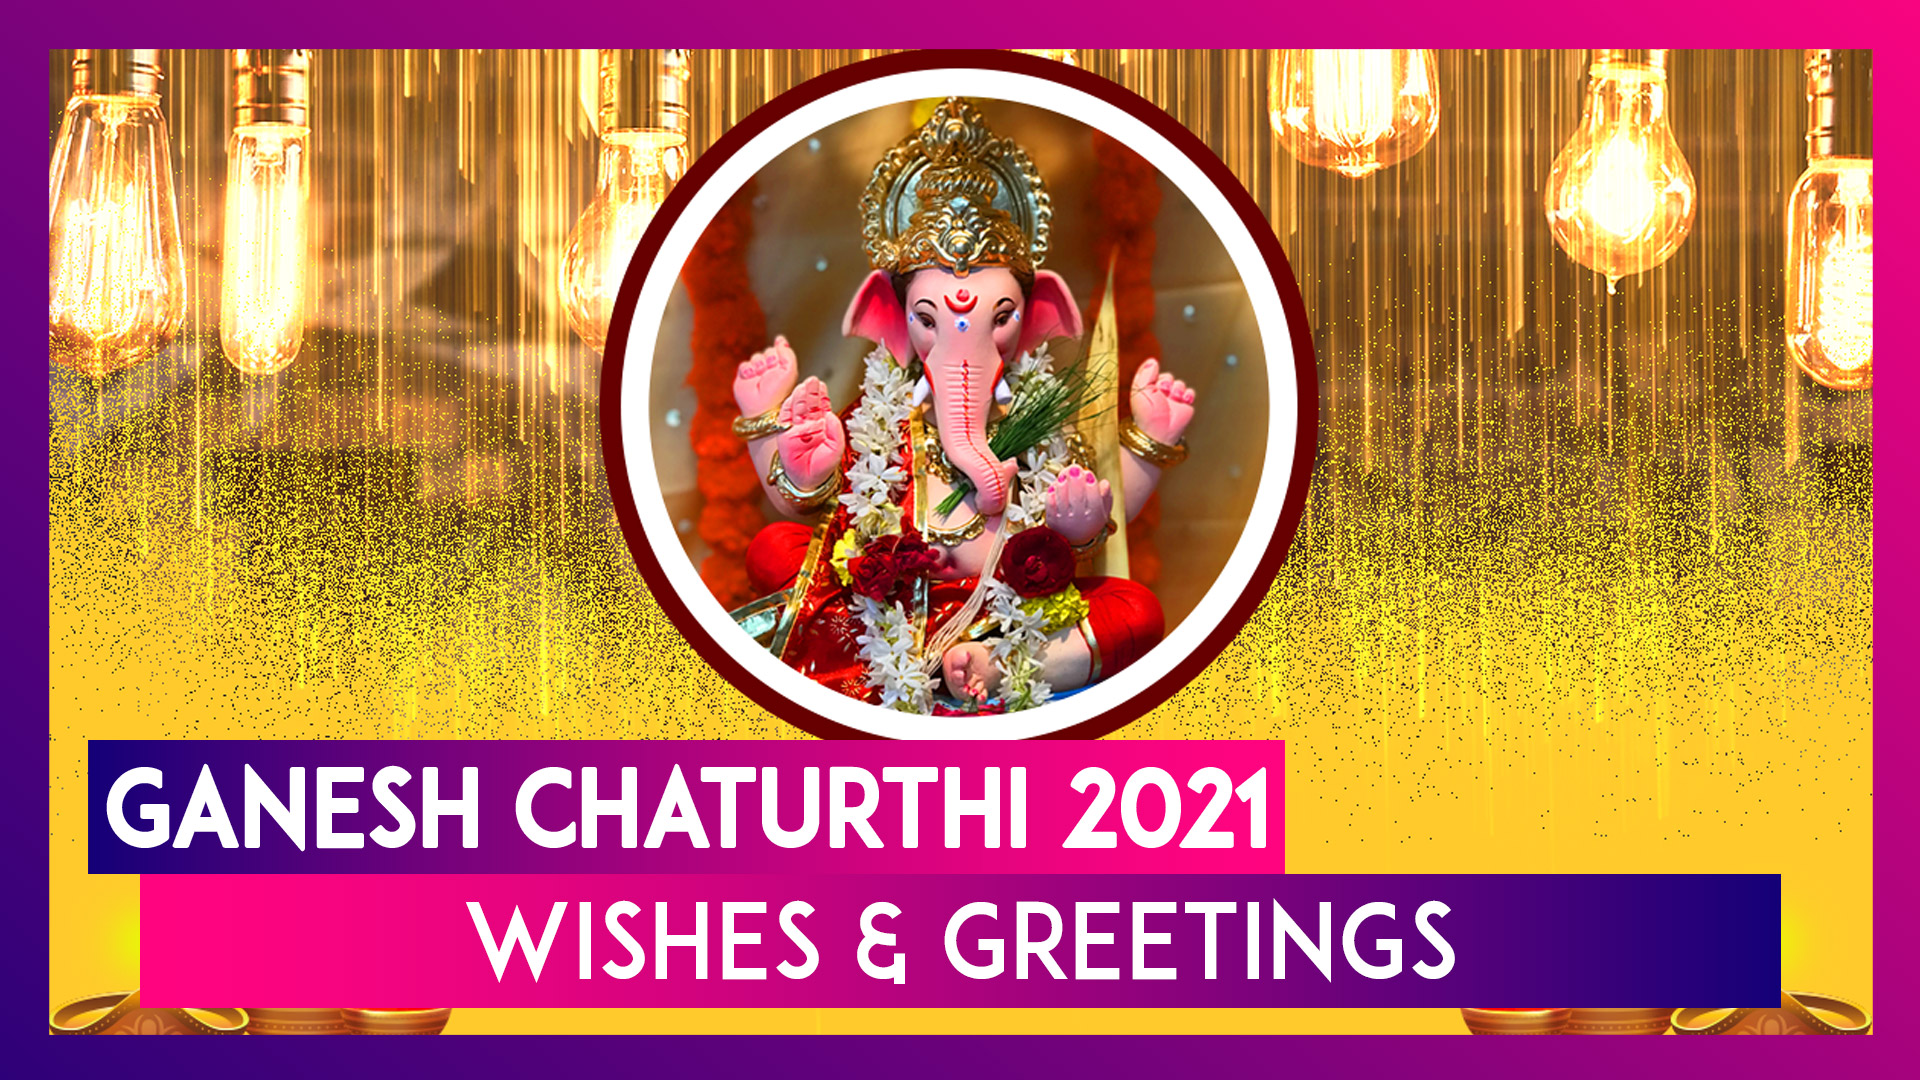 Ganesh Chaturthi 2021 Wishes & Greetings: WhatsApp Messages and Images To  Send During Ganeshotsav | ðŸ“¹ Watch Videos From LatestLY